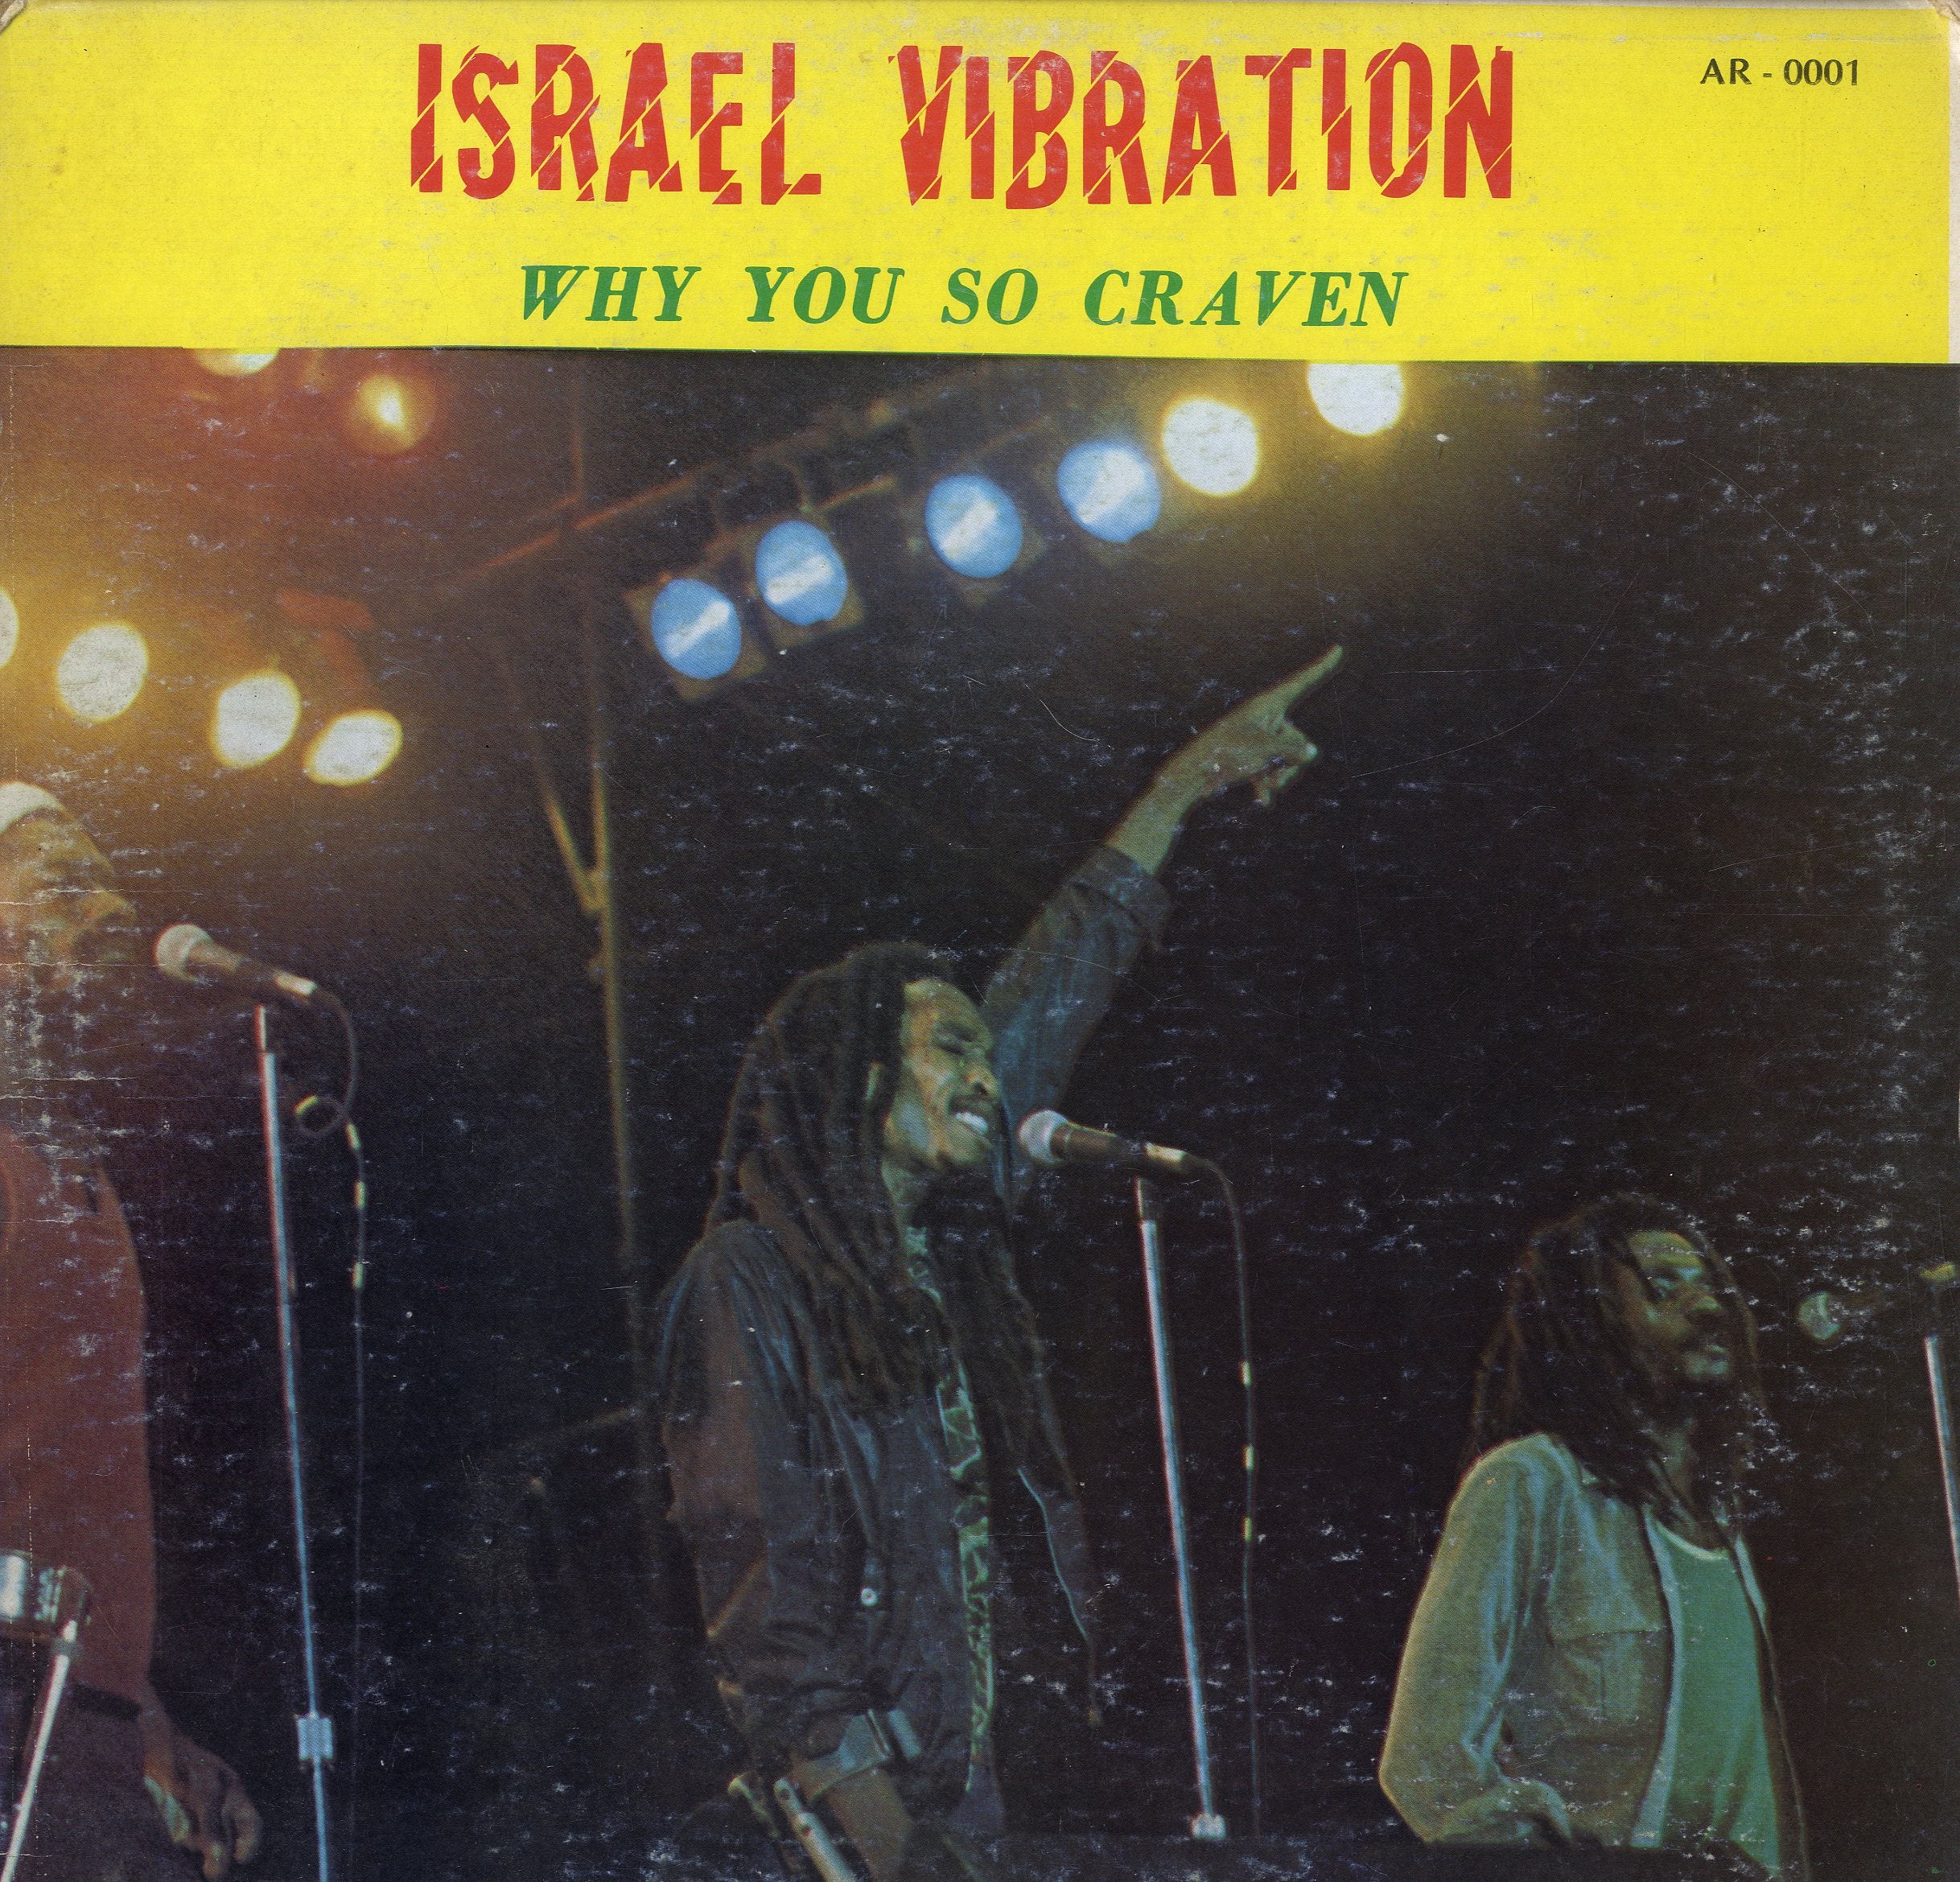 ISRAEL VIBRATION [Why You So Craven]